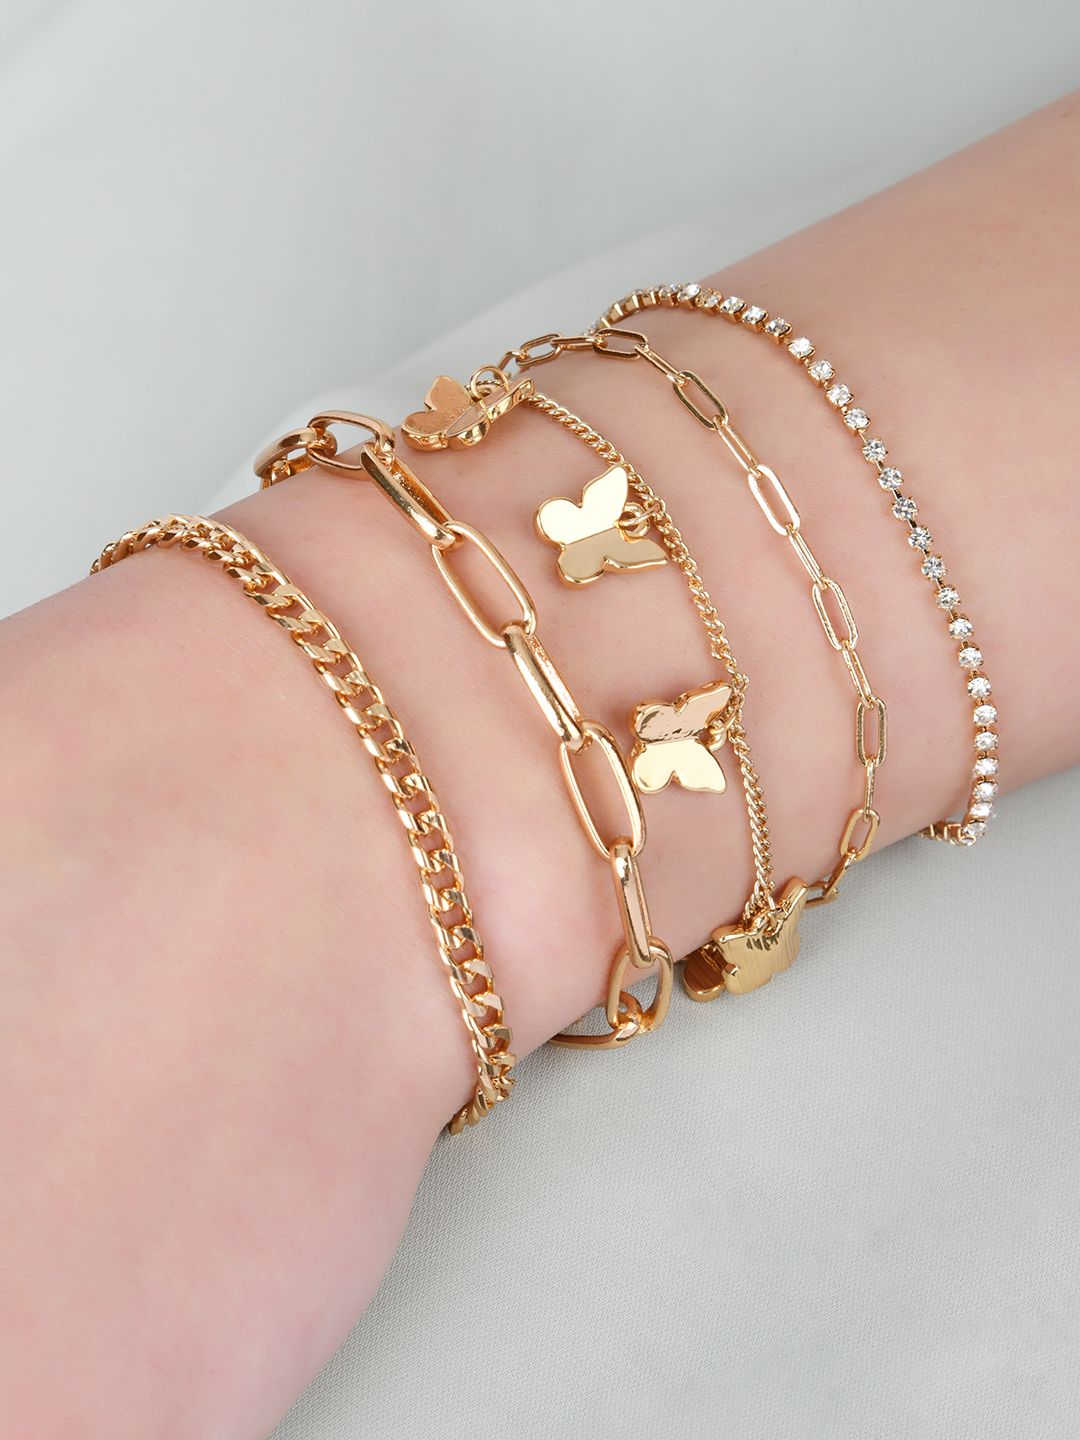 Lilly & sparkle Women Set Of 5 Gold-Plated Crystals Charm Bracelet Price in India